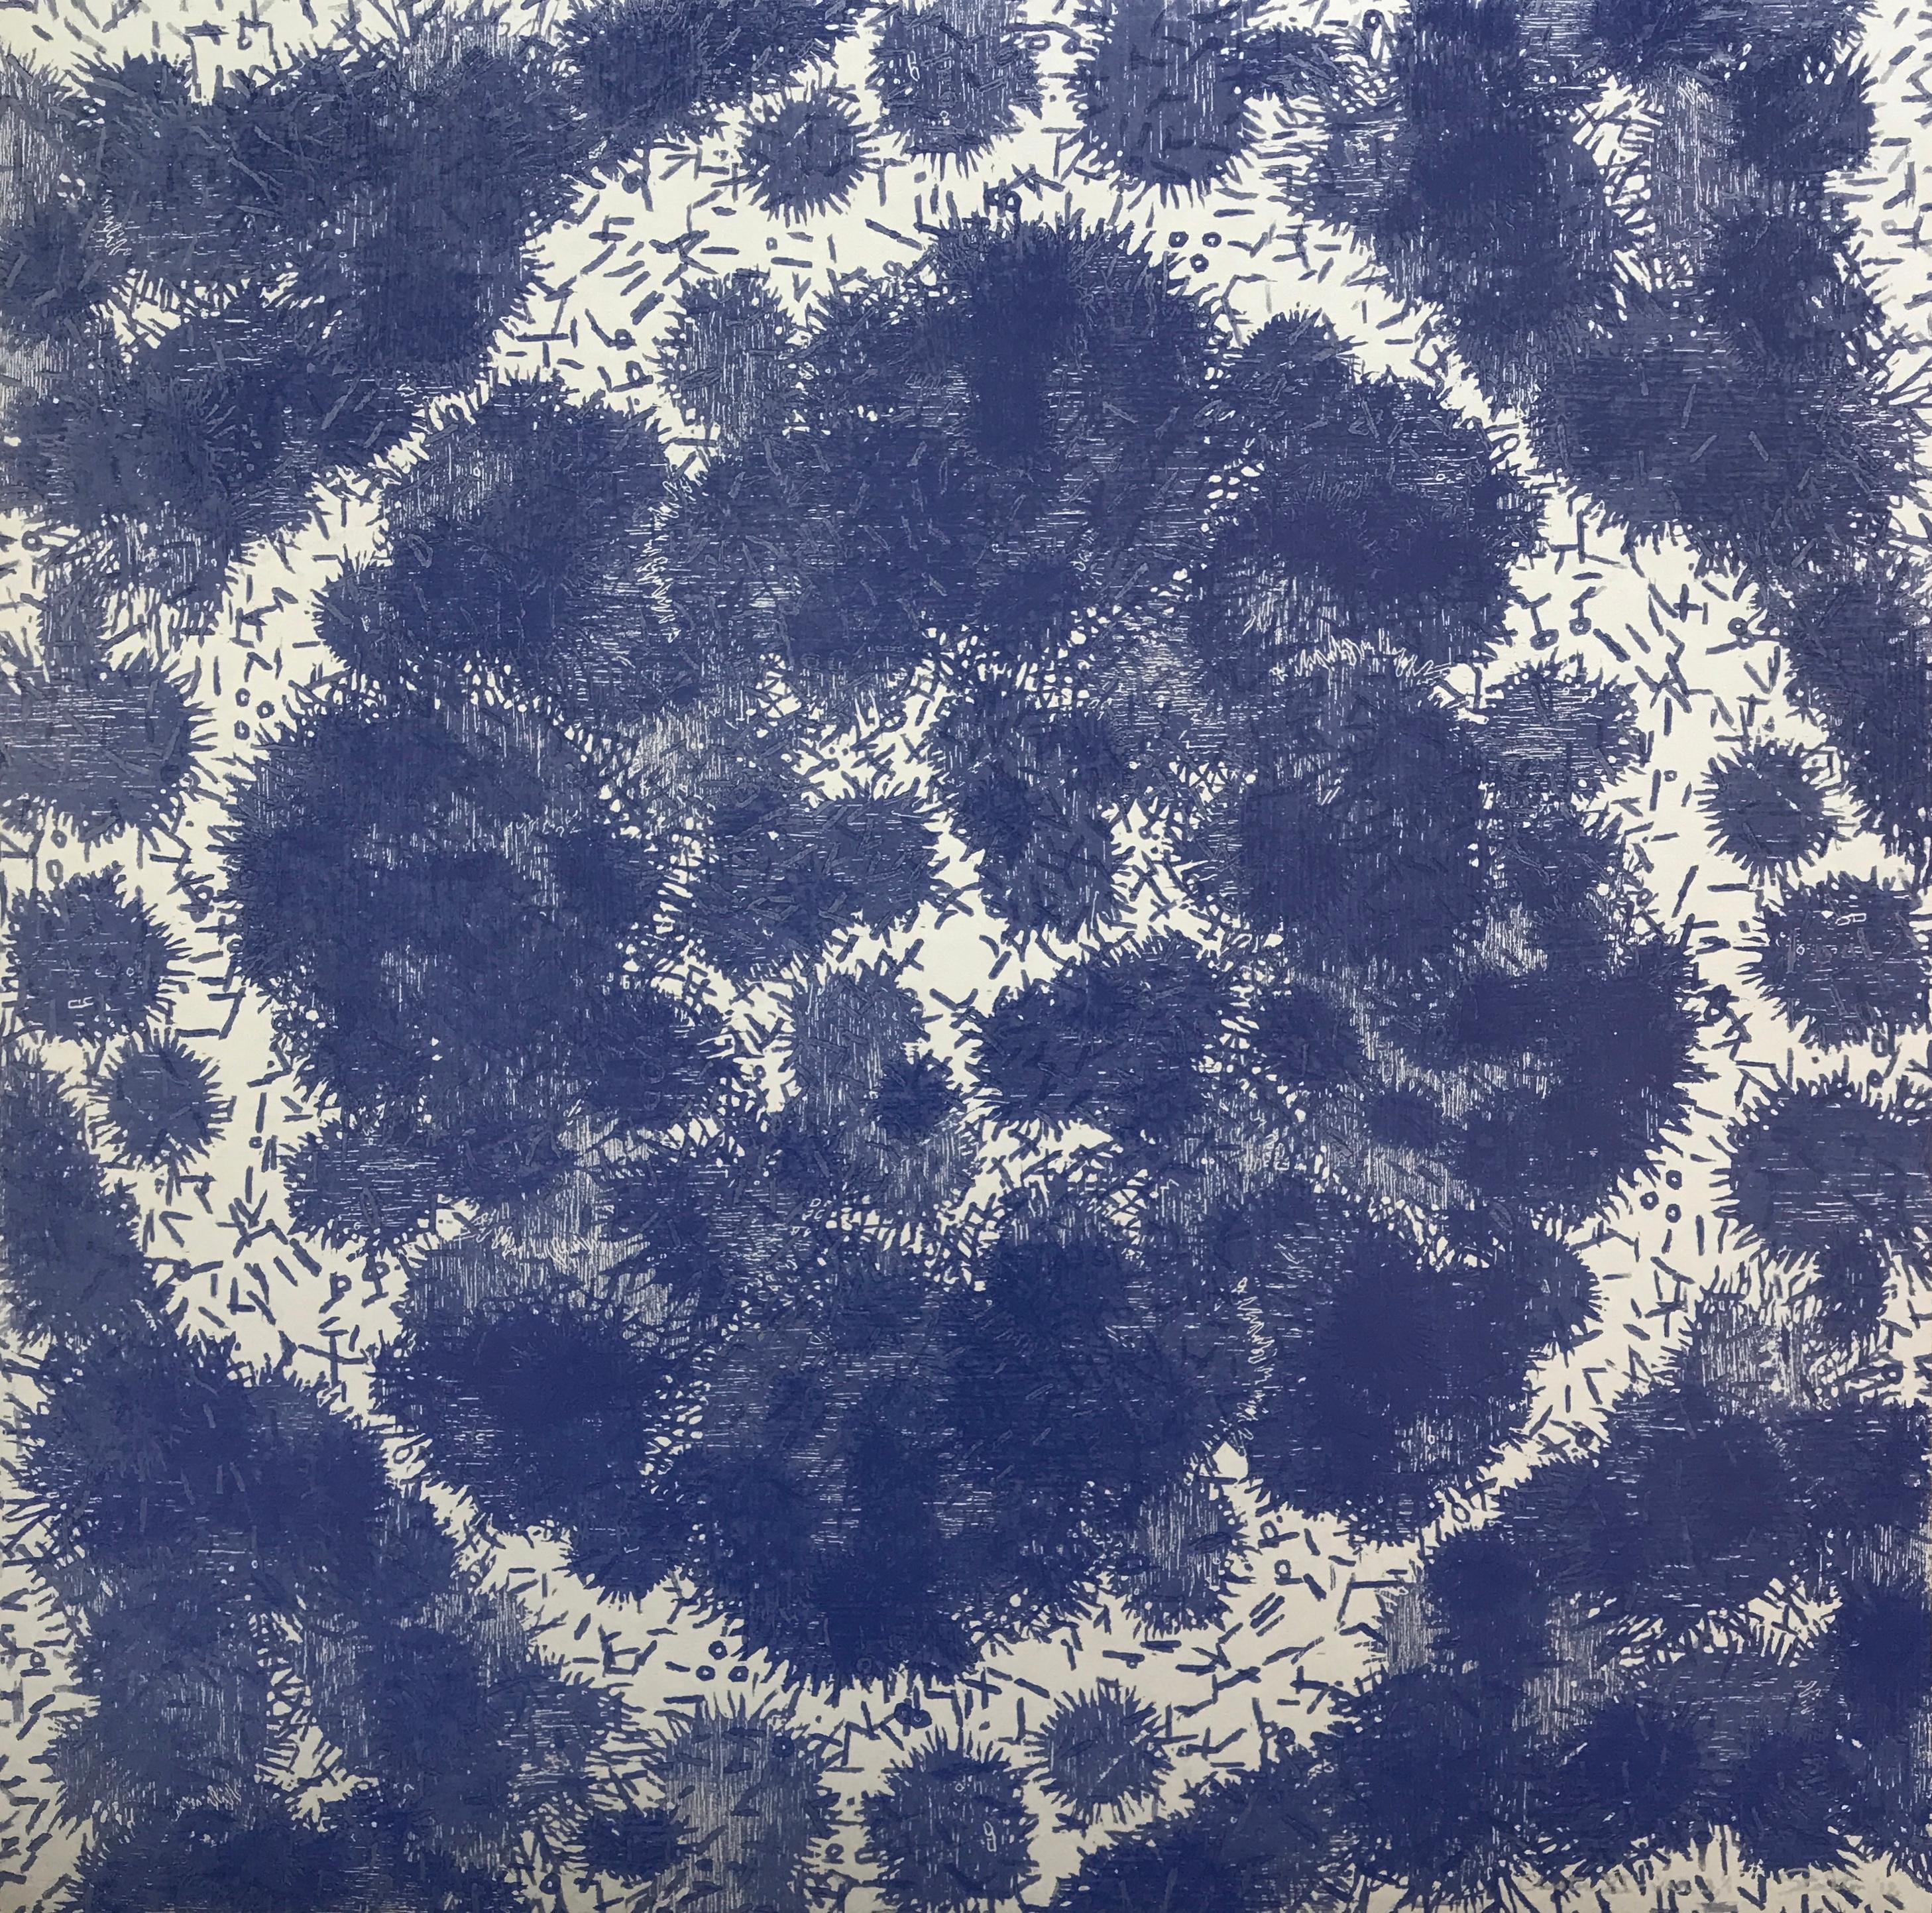 Cluster XI Three, Woodcut Print with Abstract Pattern in Navy Blue on Silver